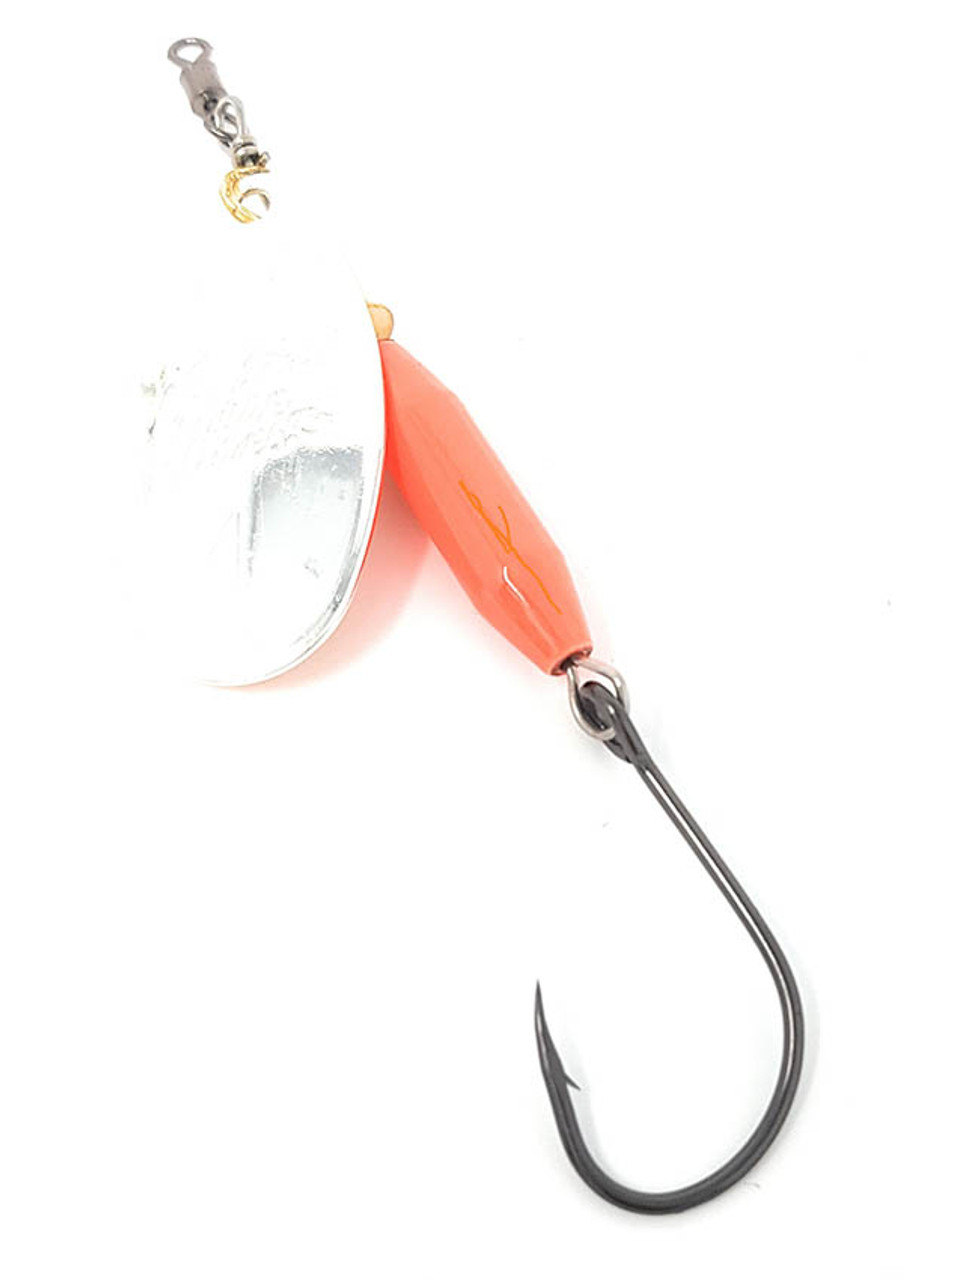 Prime Lures Weighted Spinner #5 - Silver & Orange